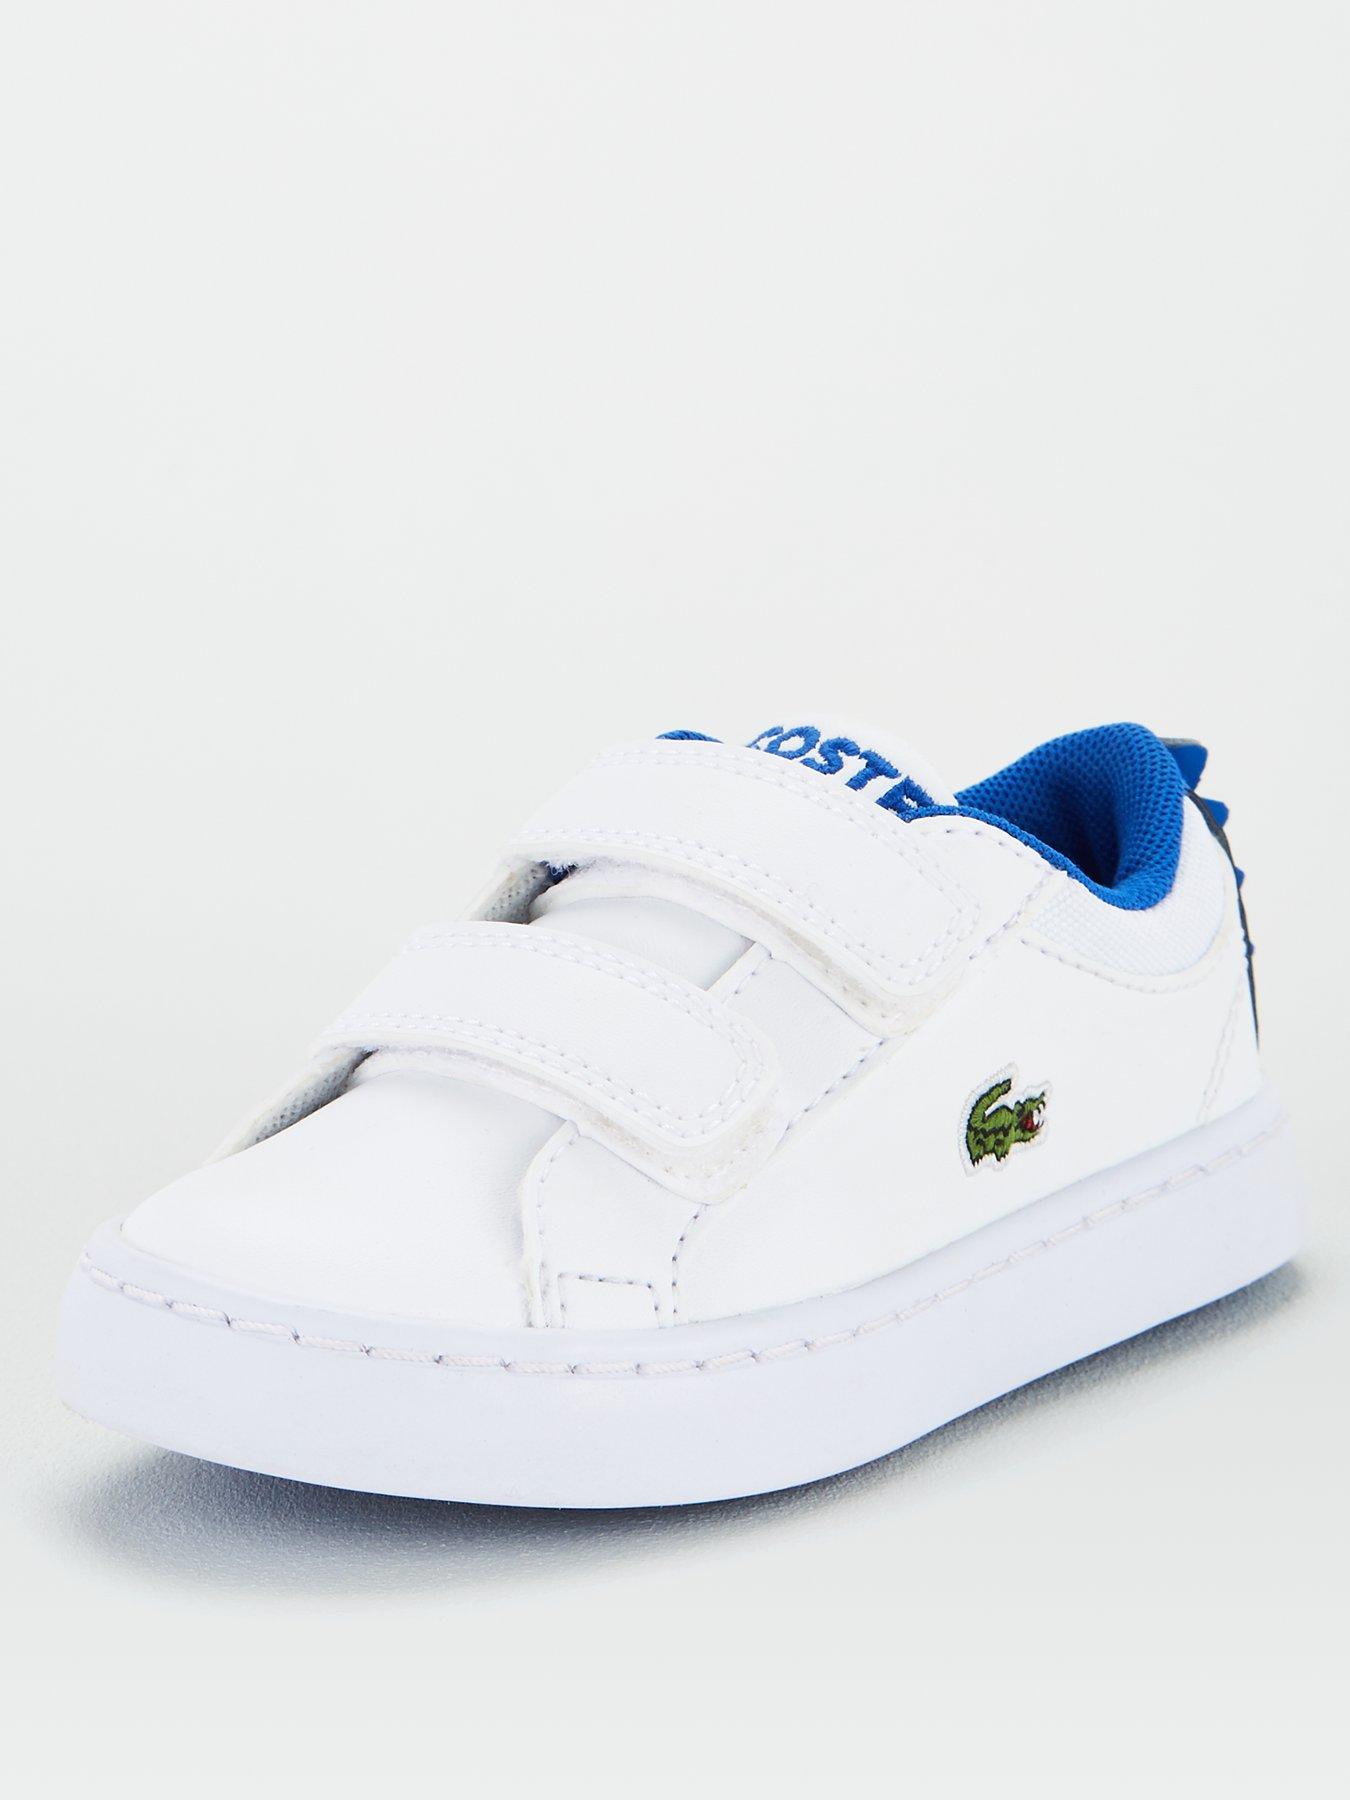 infant lacoste trainers uk